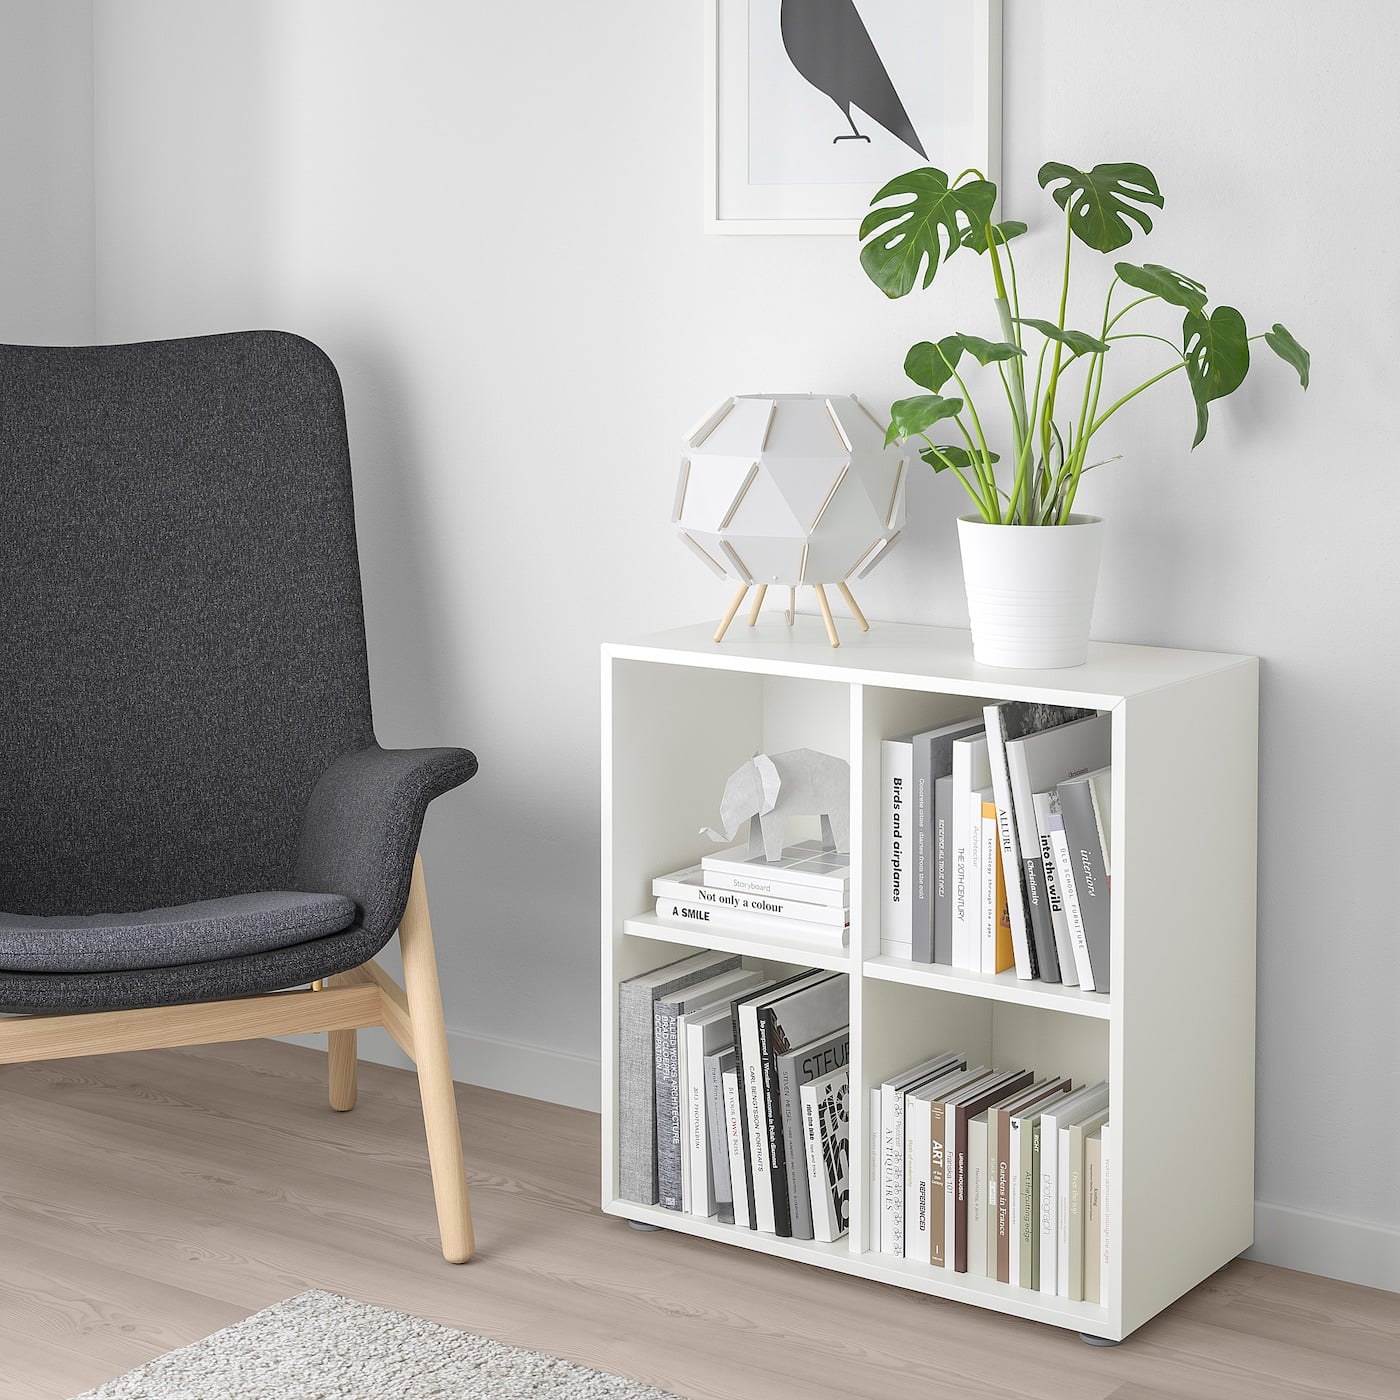 Peru Onweersbui Nadruk Eket Storage Combination With Feet | Transform Your Small Space Into a  Roomy Oasis With These Smart Furniture Solutions From Ikea | POPSUGAR Home  Photo 28